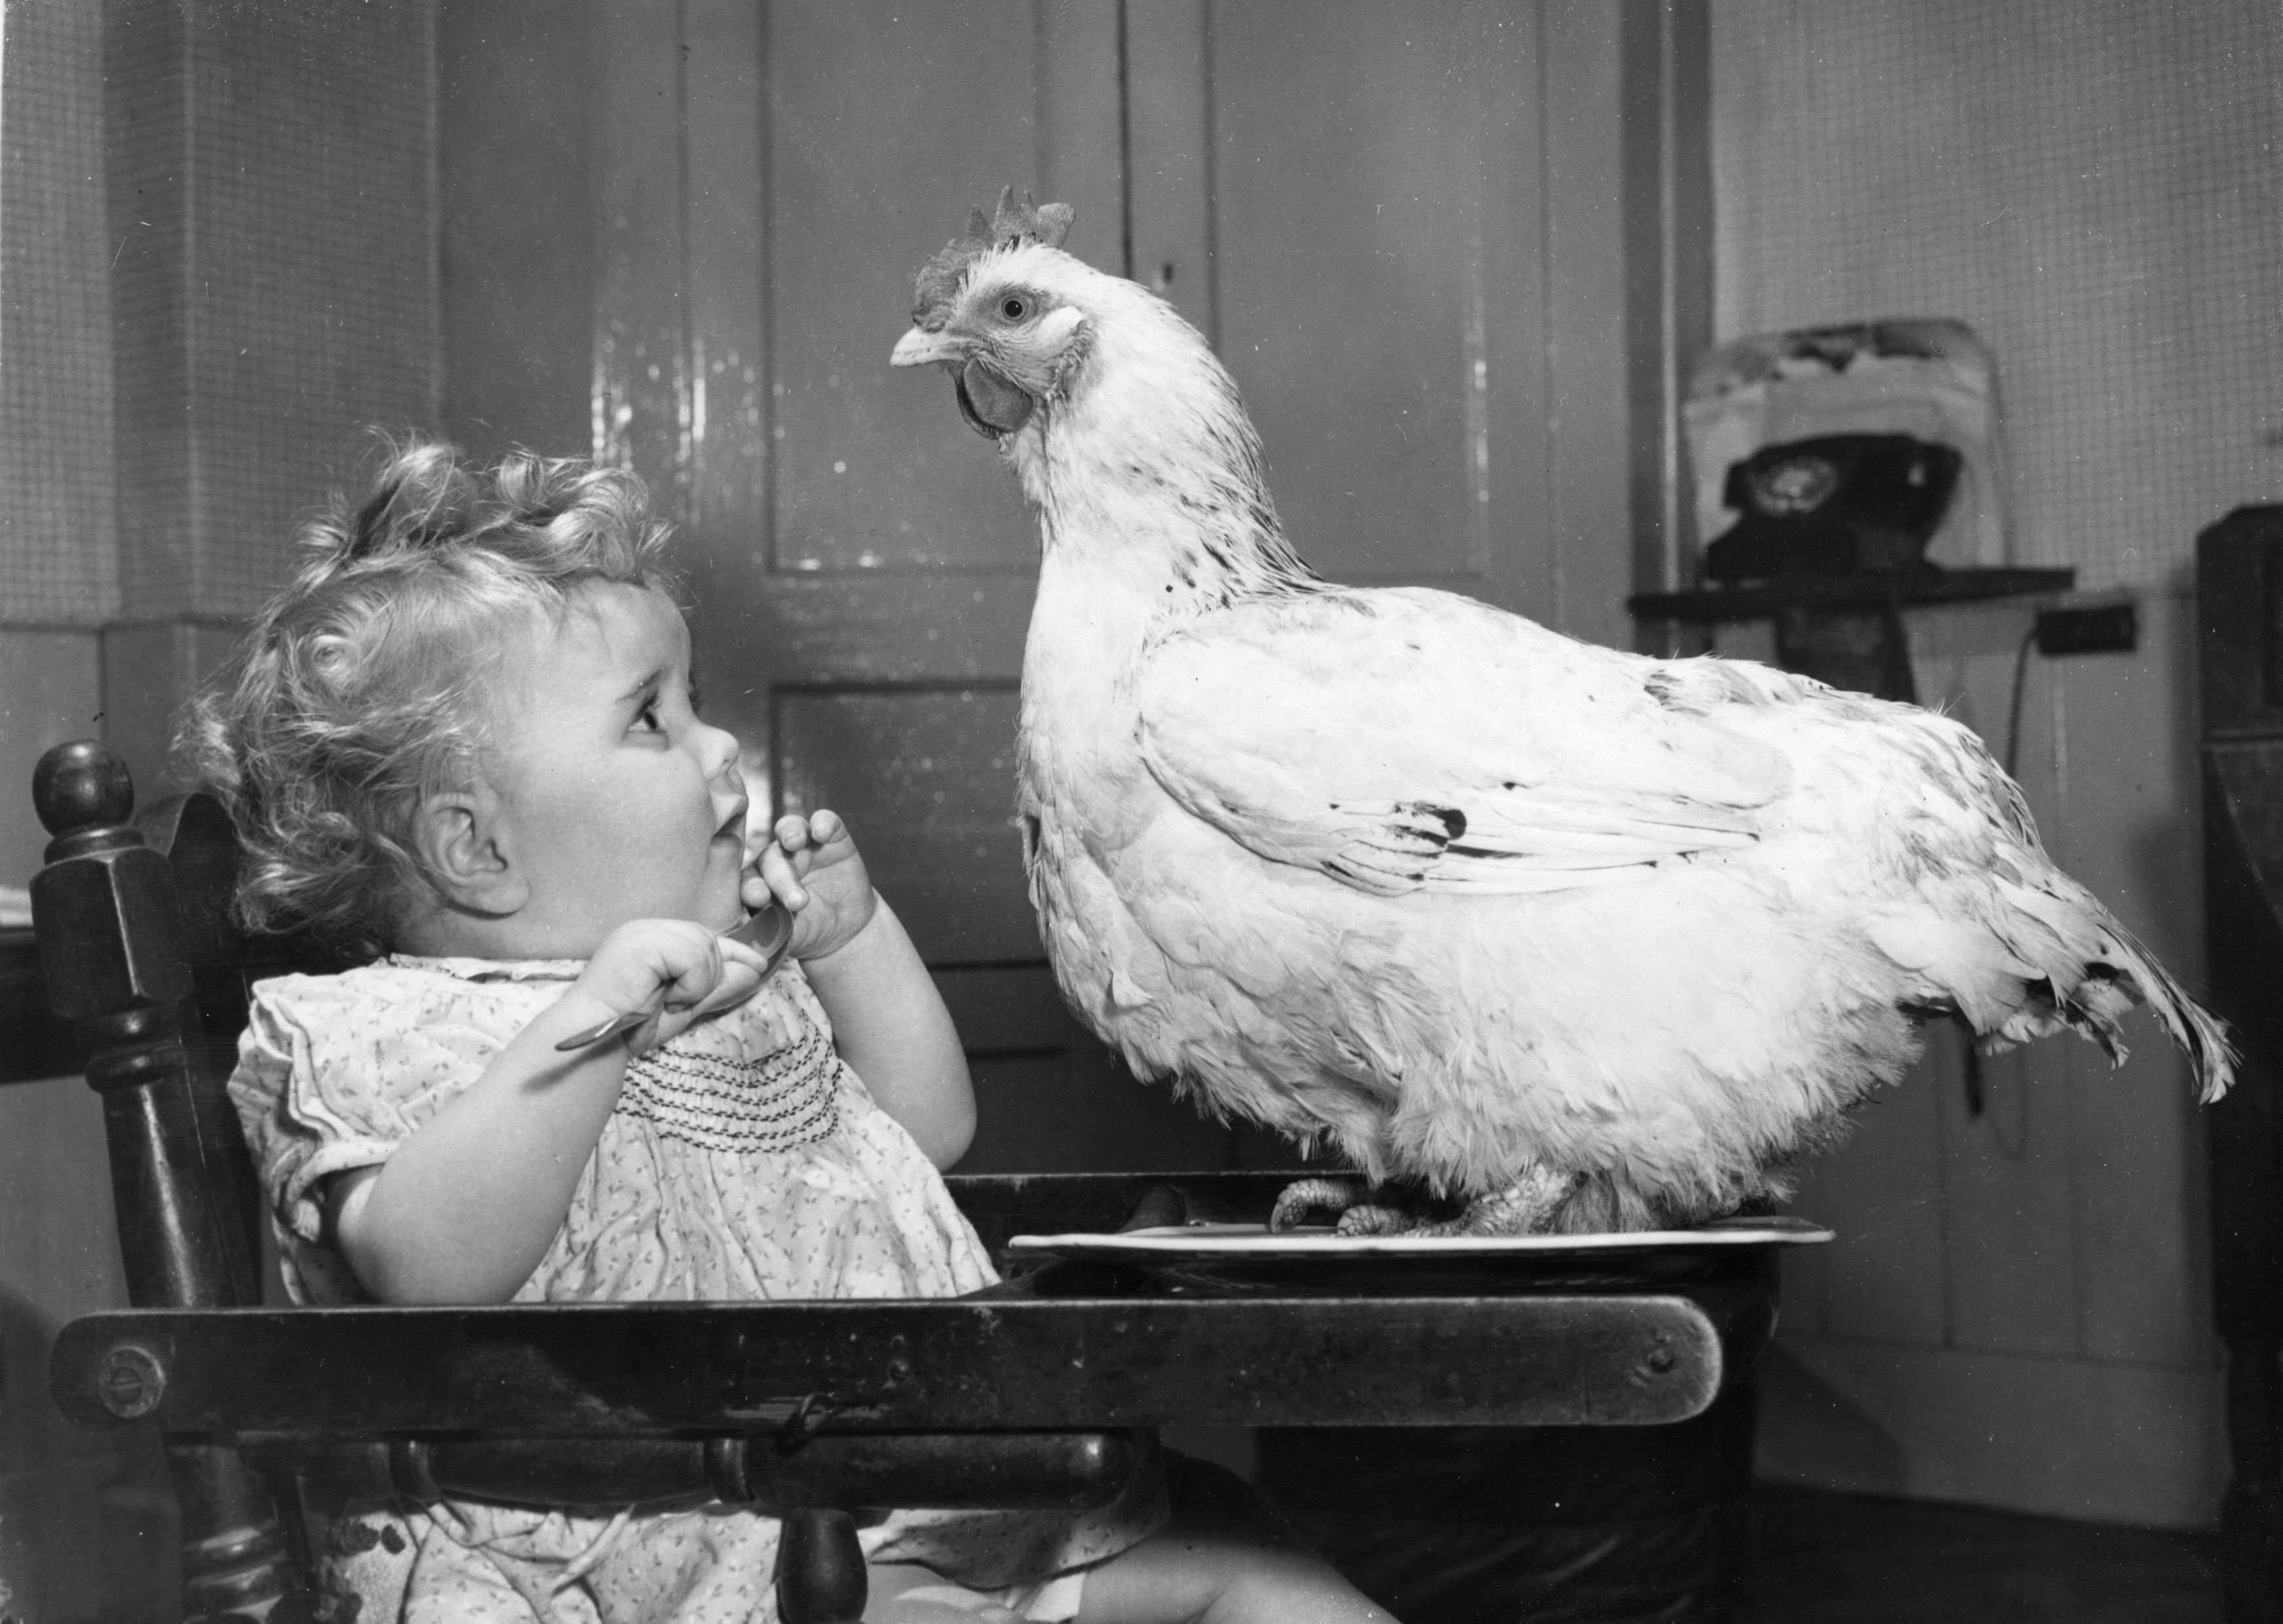 A child holding a spoon near a chicken